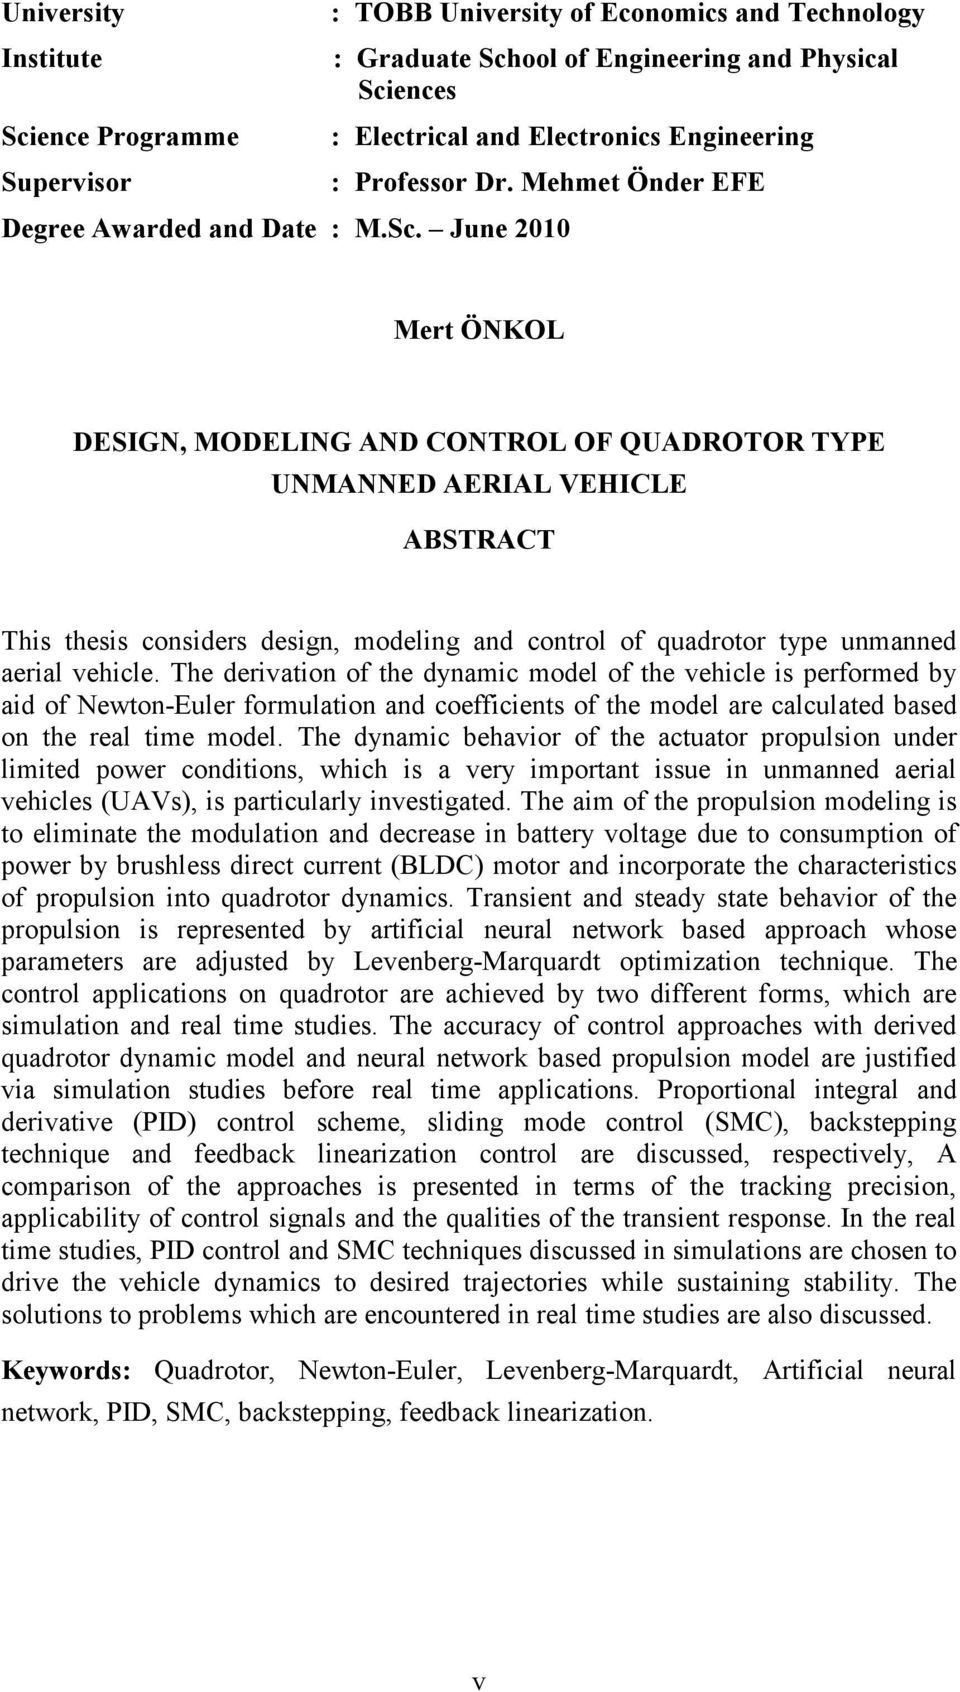 June 21 Mert ÖNKOL DESIGN, MODELING AND CONTROL OF QUADROTOR TYPE UNMANNED AERIAL VEHICLE ABSTRACT This thesis considers design, modeling and control of quadrotor type unmanned aerial vehicle.